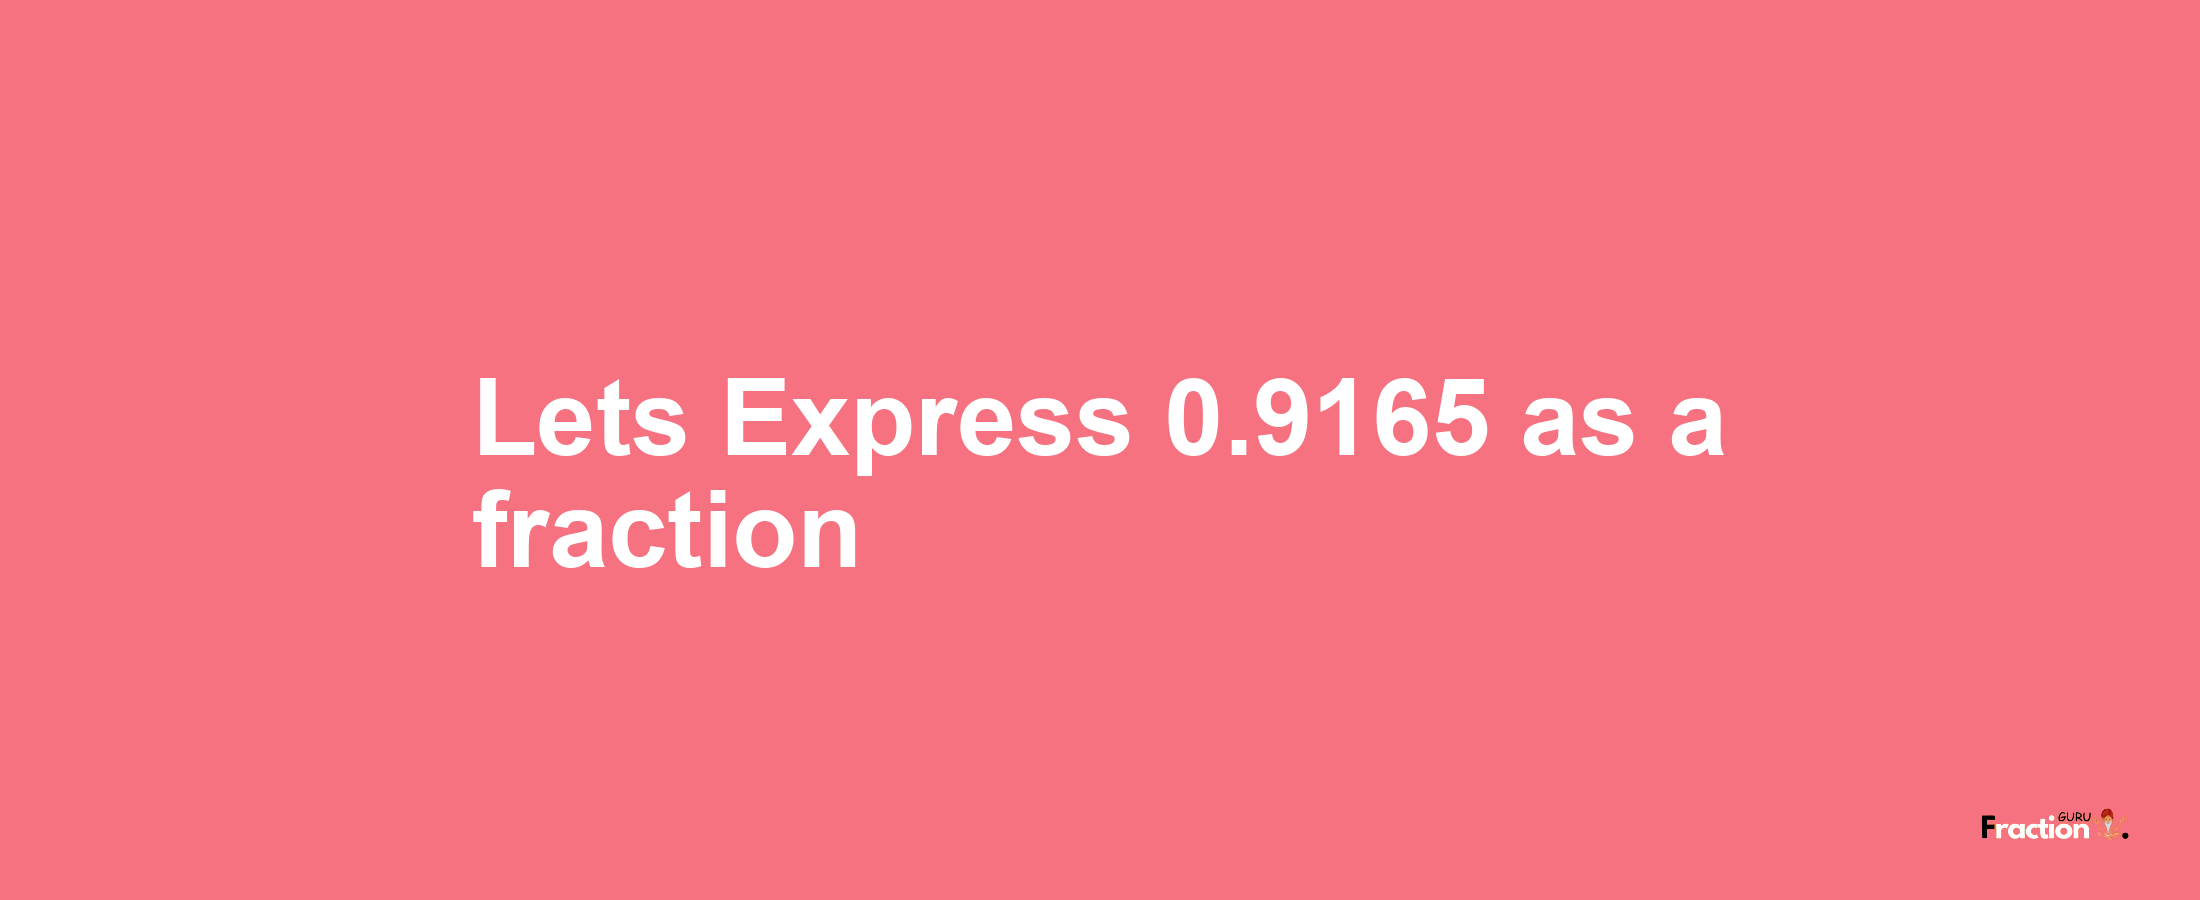 Lets Express 0.9165 as afraction